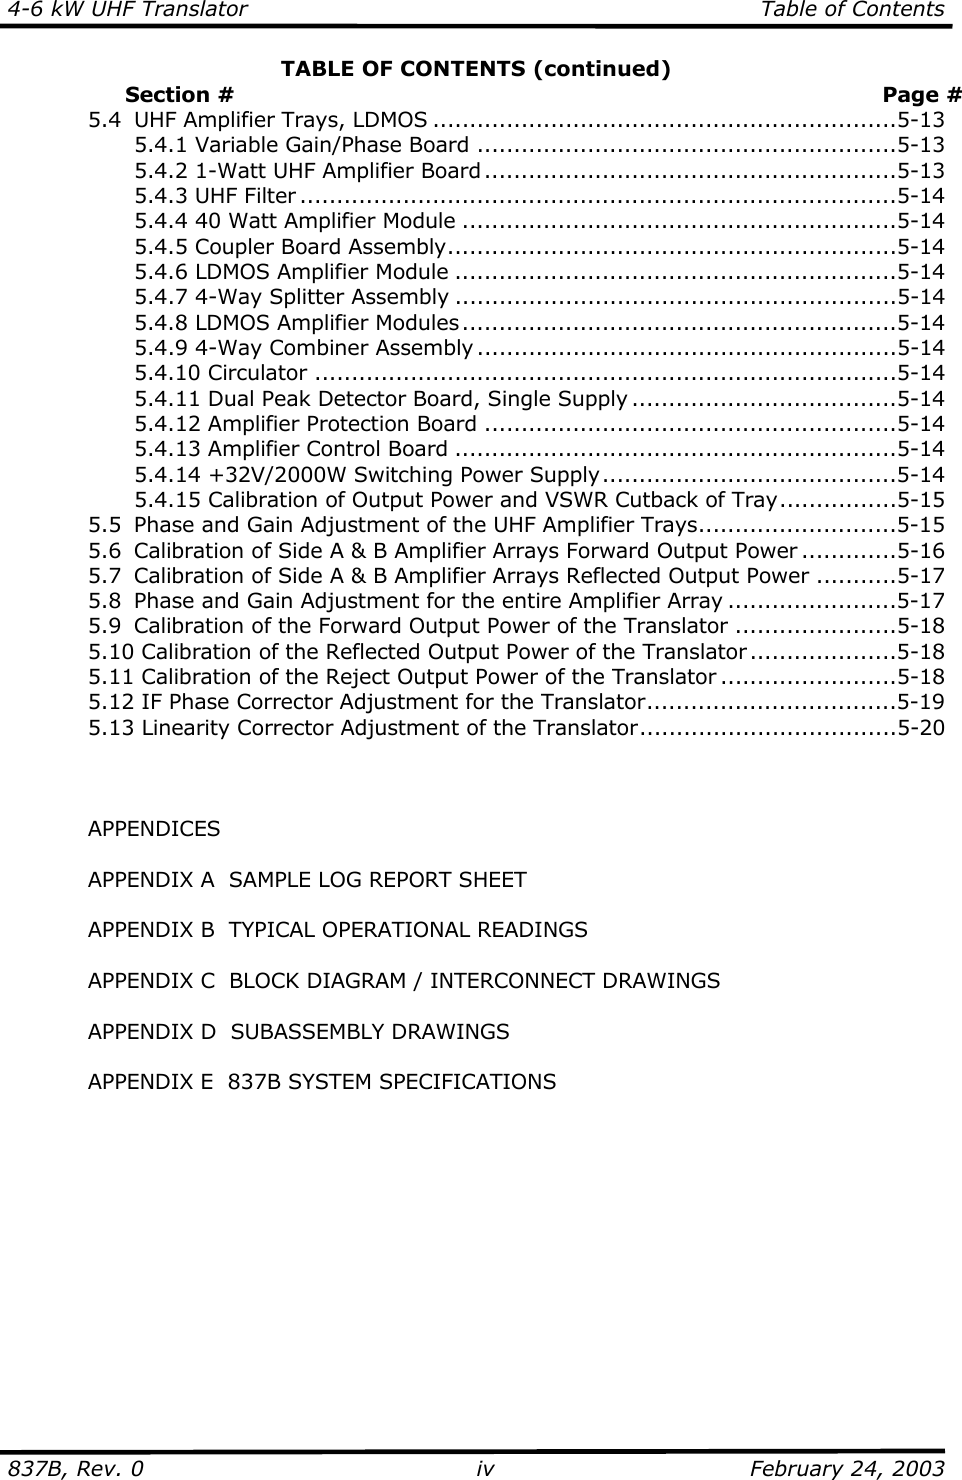 4-6 kW UHF Translator  Table of Contents  837B, Rev. 0 iv  February 24, 2003 TABLE OF CONTENTS (continued)                  Section #  Page #   5.4  UHF Amplifier Trays, LDMOS ...............................................................5-13     5.4.1 Variable Gain/Phase Board .........................................................5-13     5.4.2 1-Watt UHF Amplifier Board ........................................................5-13   5.4.3 UHF Filter .................................................................................5-14     5.4.4 40 Watt Amplifier Module ...........................................................5-14   5.4.5 Coupler Board Assembly.............................................................5-14     5.4.6 LDMOS Amplifier Module ............................................................5-14     5.4.7 4-Way Splitter Assembly ............................................................5-14     5.4.8 LDMOS Amplifier Modules...........................................................5-14     5.4.9 4-Way Combiner Assembly .........................................................5-14   5.4.10 Circulator ...............................................................................5-14     5.4.11 Dual Peak Detector Board, Single Supply ....................................5-14     5.4.12 Amplifier Protection Board ........................................................5-14   5.4.13 Amplifier Control Board ............................................................5-14     5.4.14 +32V/2000W Switching Power Supply........................................5-14     5.4.15 Calibration of Output Power and VSWR Cutback of Tray................5-15   5.5  Phase and Gain Adjustment of the UHF Amplifier Trays...........................5-15   5.6  Calibration of Side A &amp; B Amplifier Arrays Forward Output Power .............5-16   5.7  Calibration of Side A &amp; B Amplifier Arrays Reflected Output Power ...........5-17   5.8  Phase and Gain Adjustment for the entire Amplifier Array .......................5-17   5.9  Calibration of the Forward Output Power of the Translator ......................5-18   5.10 Calibration of the Reflected Output Power of the Translator ....................5-18   5.11 Calibration of the Reject Output Power of the Translator ........................5-18   5.12 IF Phase Corrector Adjustment for the Translator..................................5-19   5.13 Linearity Corrector Adjustment of the Translator...................................5-20     APPENDICES    APPENDIX A  SAMPLE LOG REPORT SHEET    APPENDIX B  TYPICAL OPERATIONAL READINGS    APPENDIX C  BLOCK DIAGRAM / INTERCONNECT DRAWINGS    APPENDIX D  SUBASSEMBLY DRAWINGS    APPENDIX E  837B SYSTEM SPECIFICATIONS      